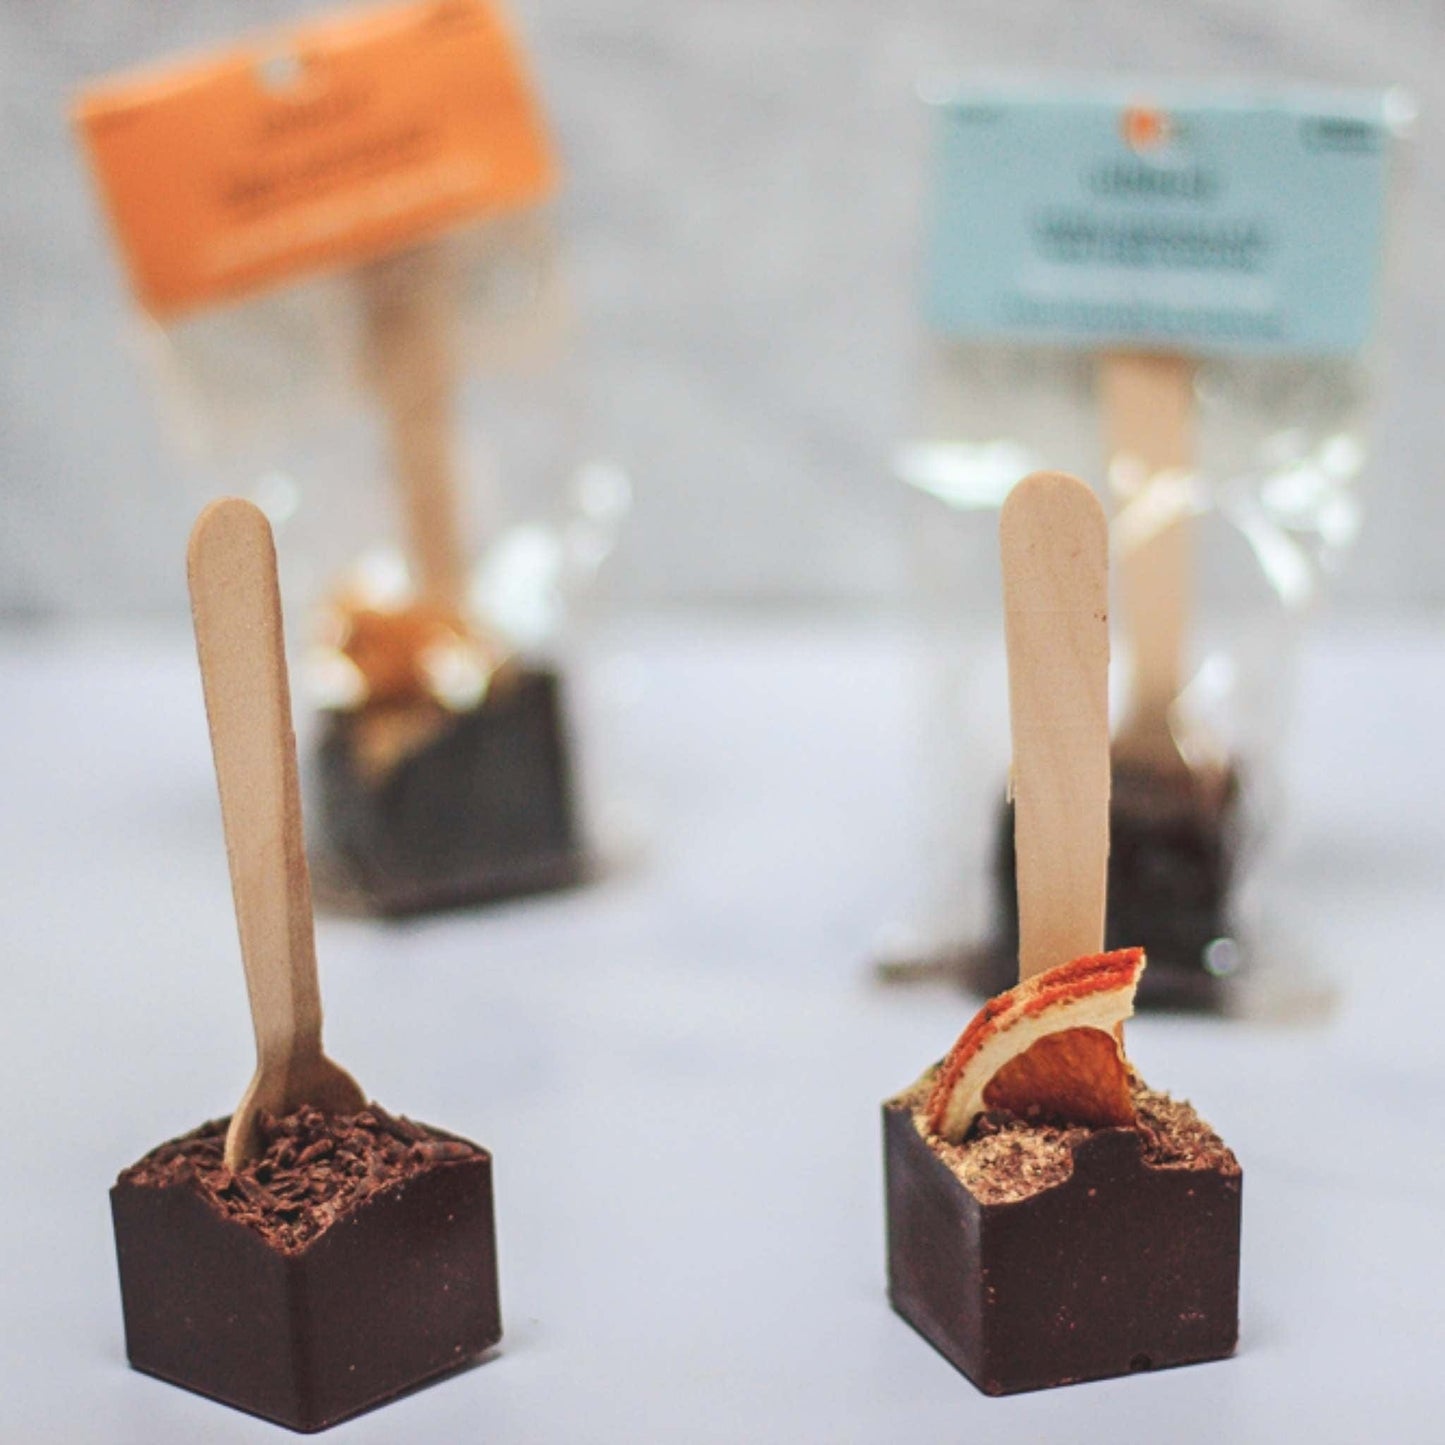 Nibbed Candy & Chocolate Nibbed Dark Chocolate Orange Melting Spoon - 75% Cacao - Drinking Chocolate